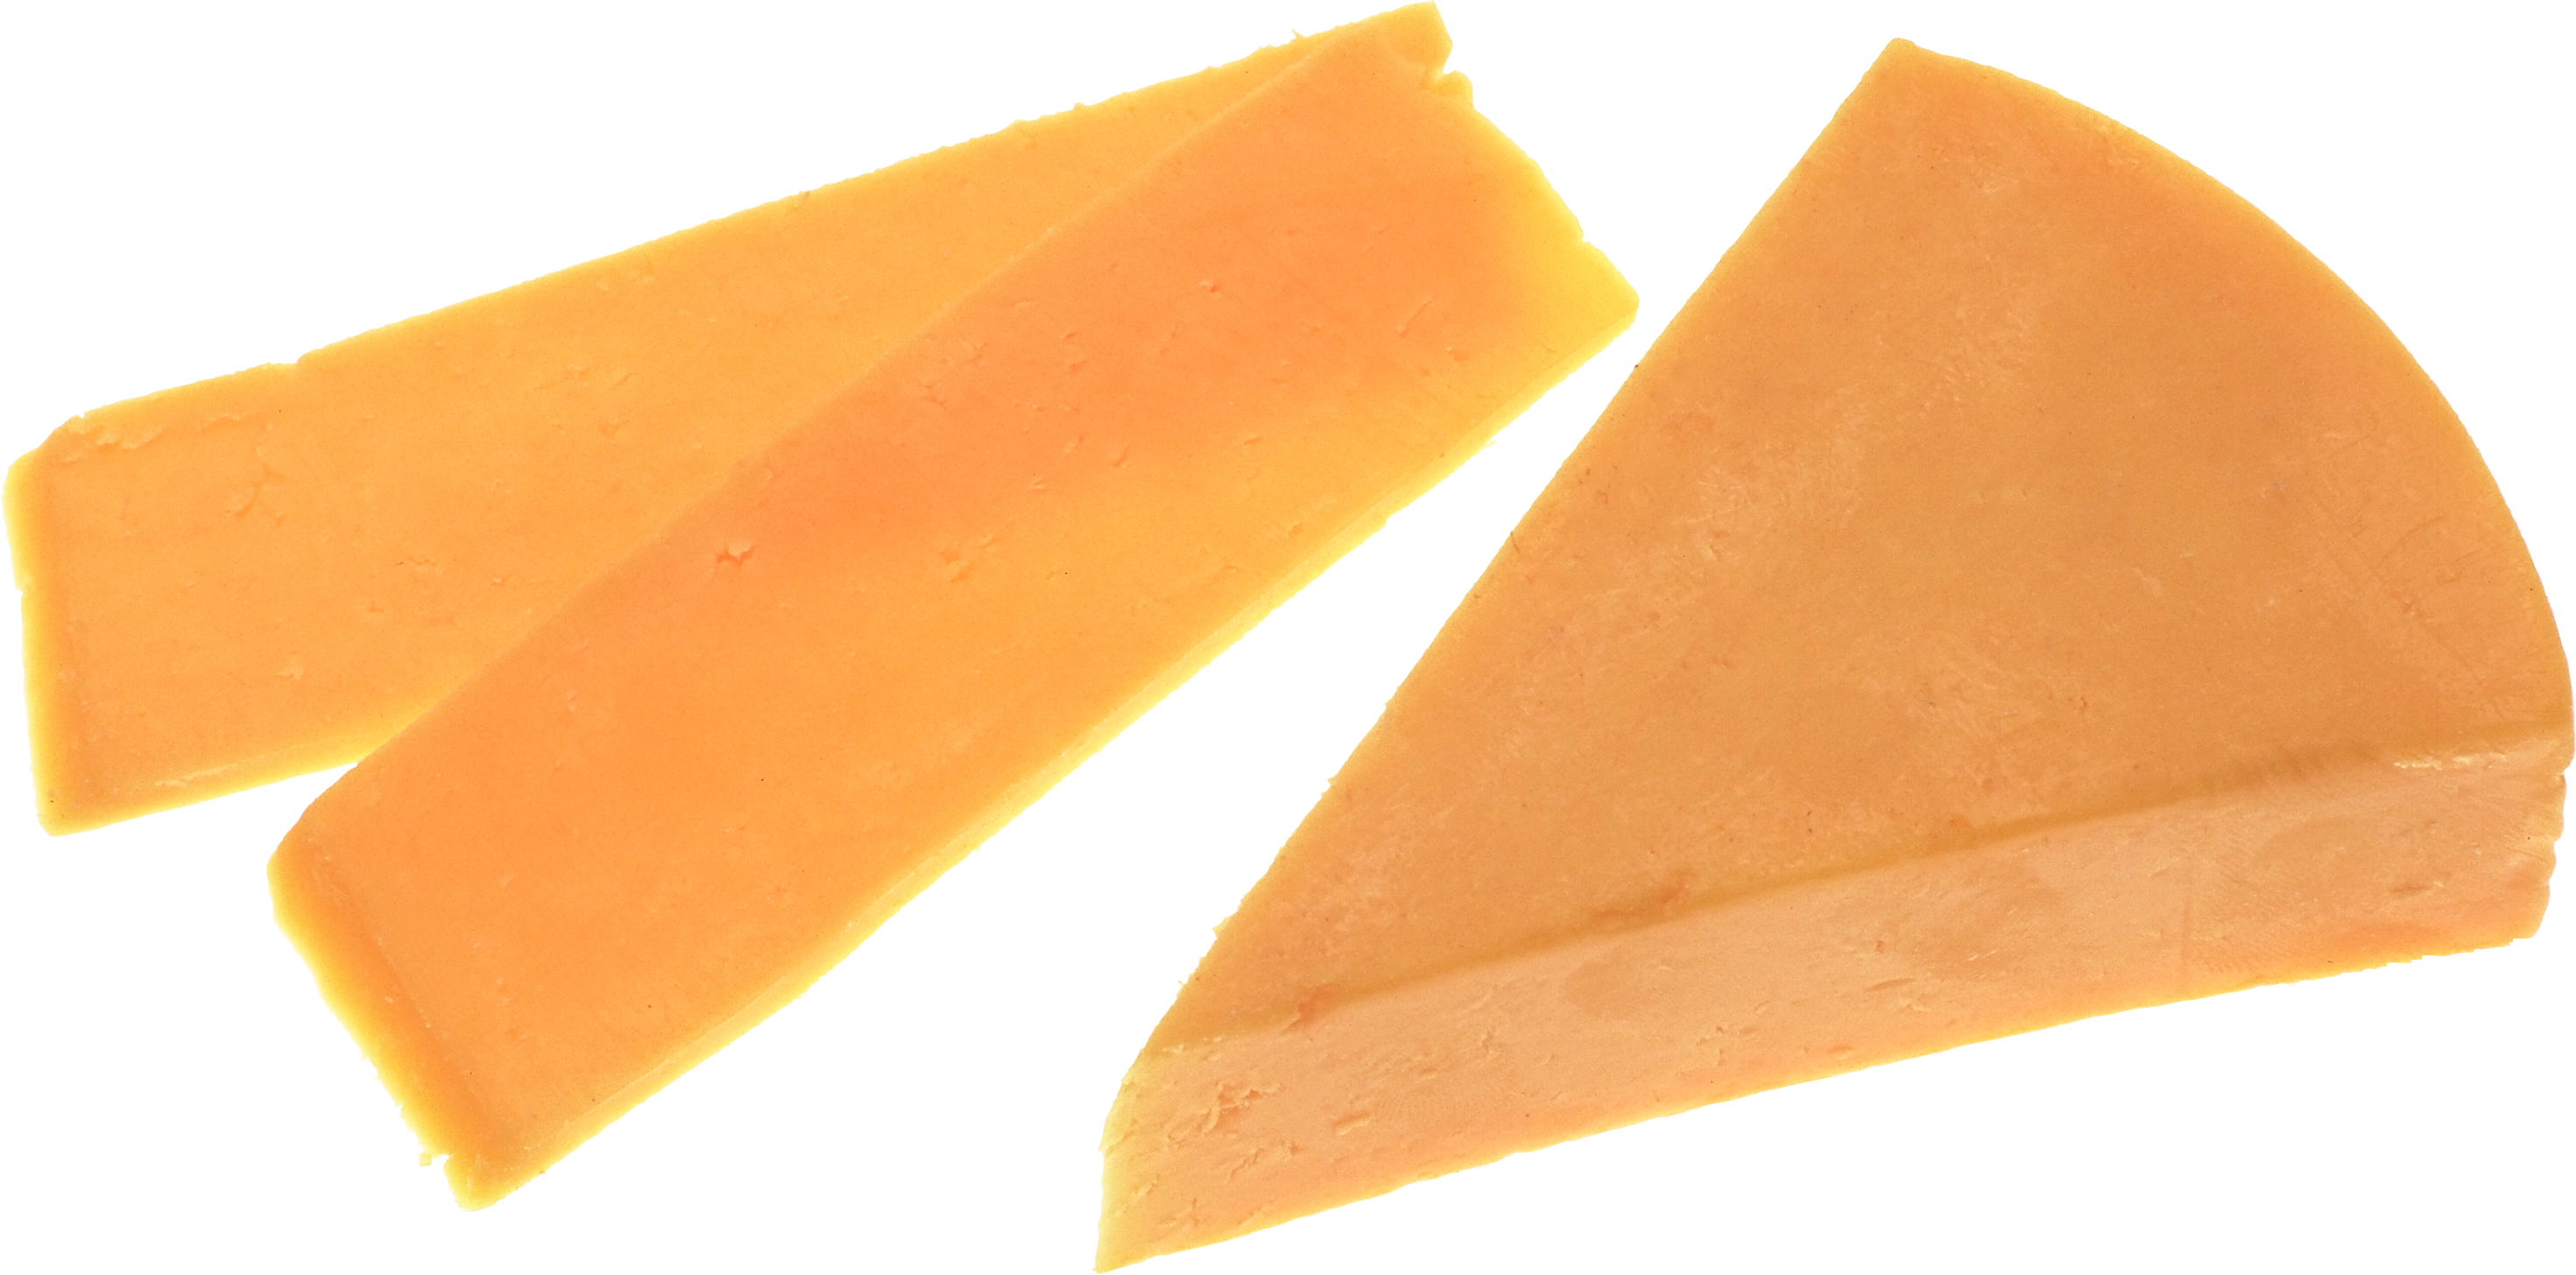 Cheese sliced PNG image